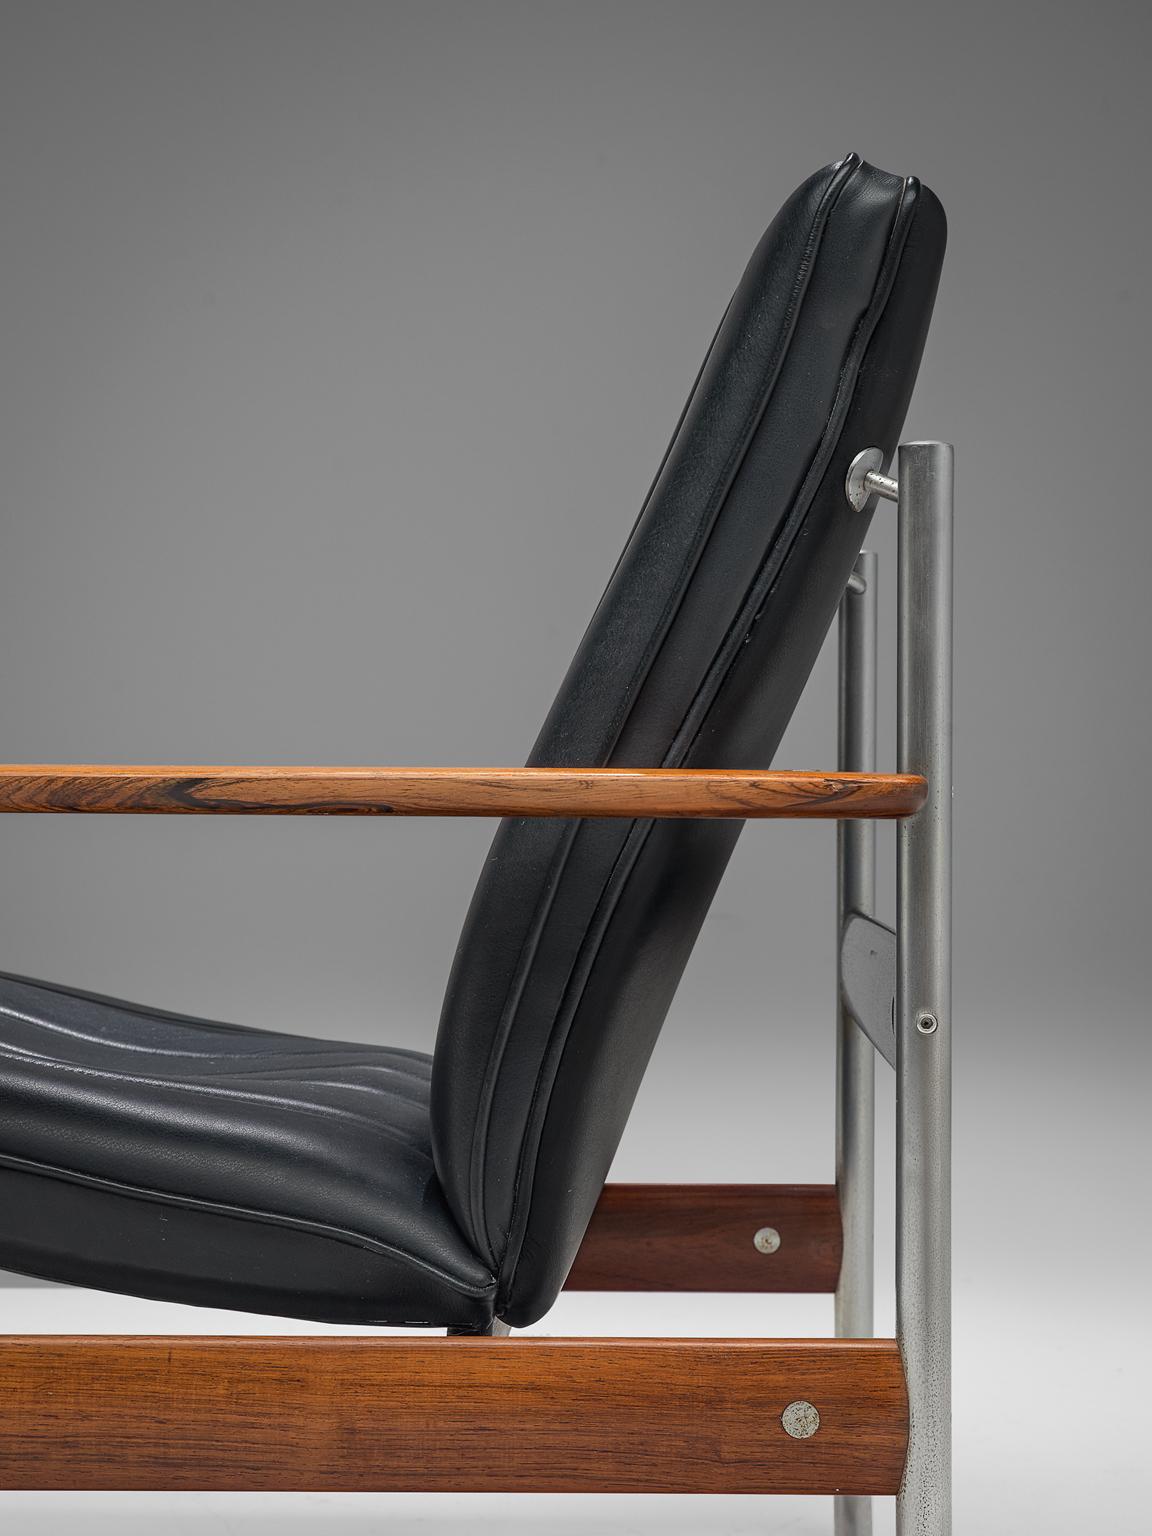 Mid-20th Century Norwegian Lounge Chairs by Sven Ivar Dysthe in Original Black Leather